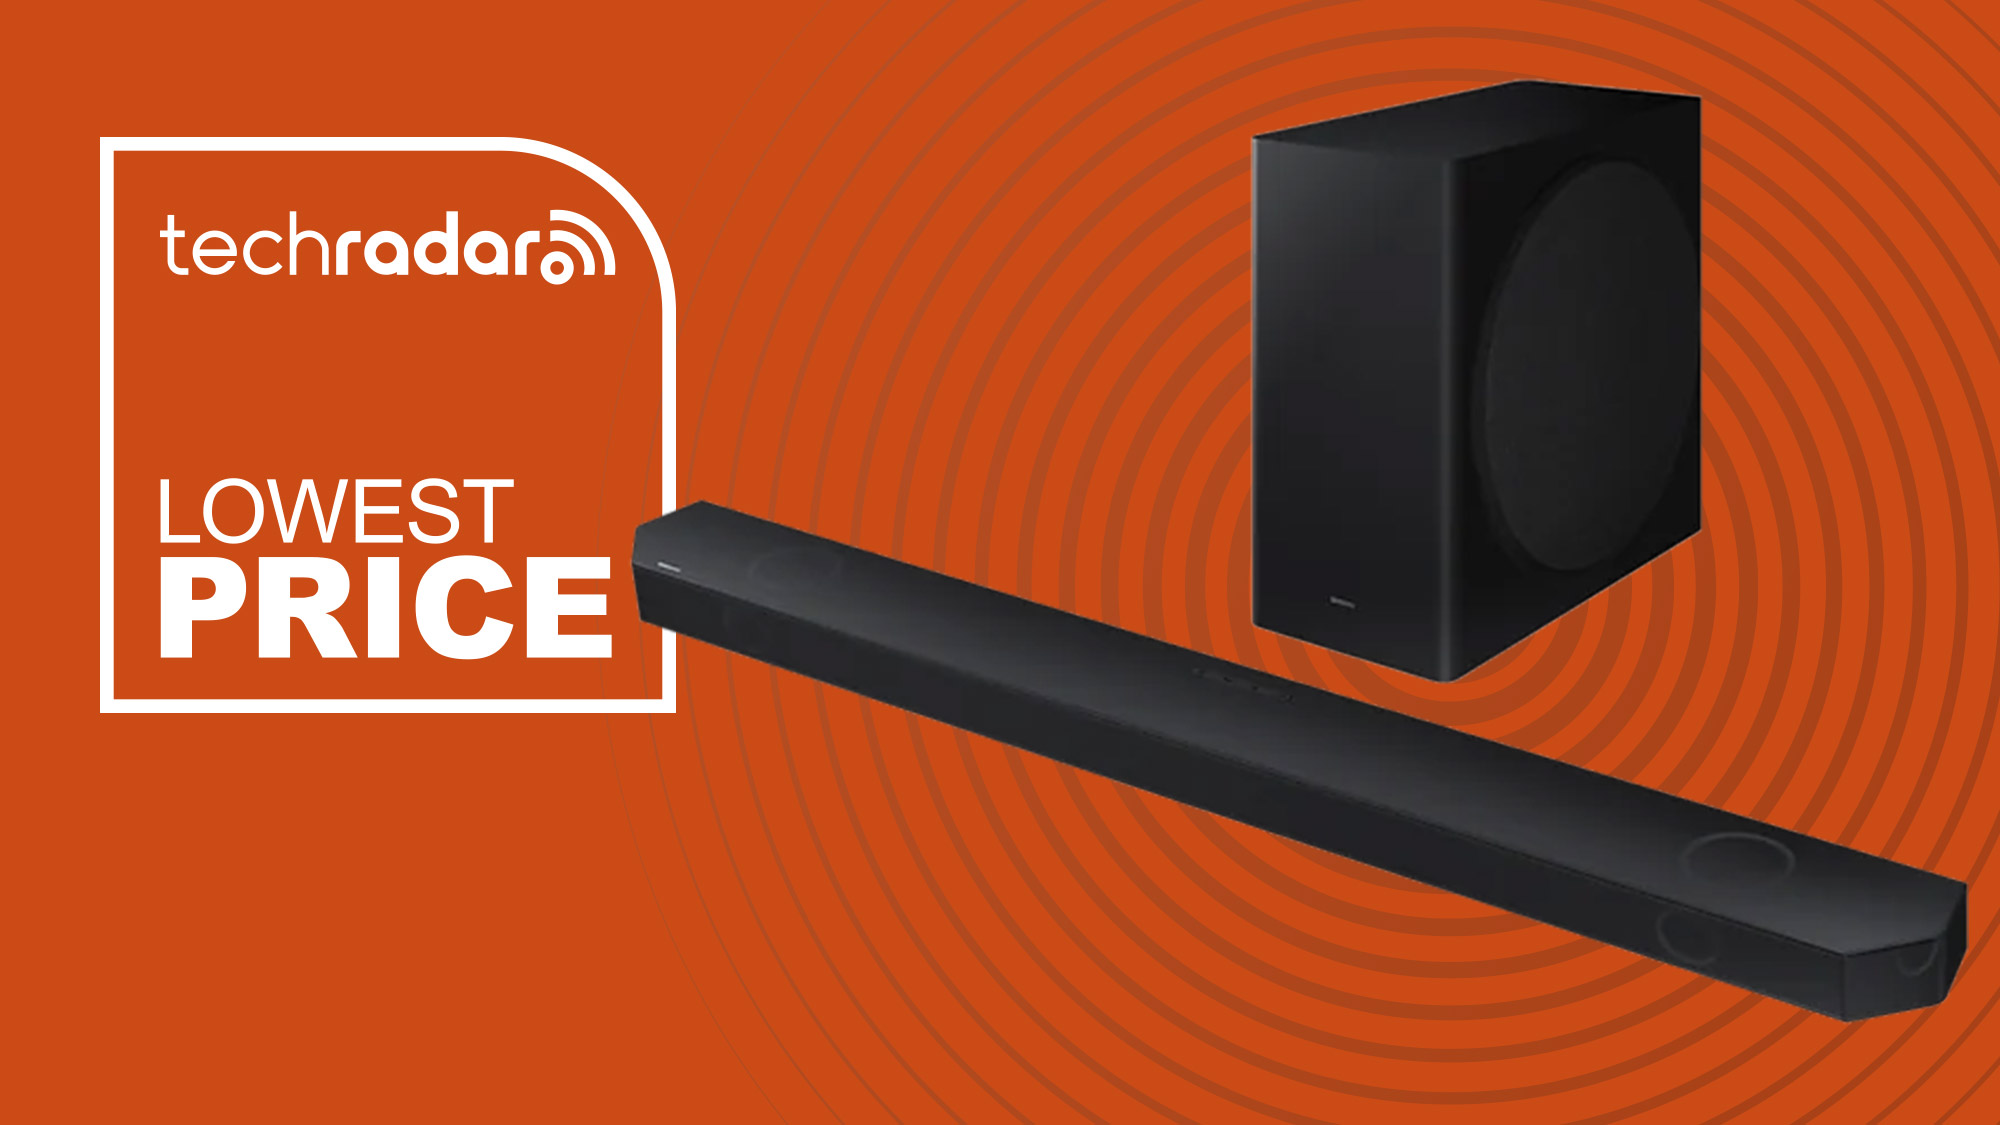 This early Black Friday deal for a Samsung Dolby Atmos soundbar is the